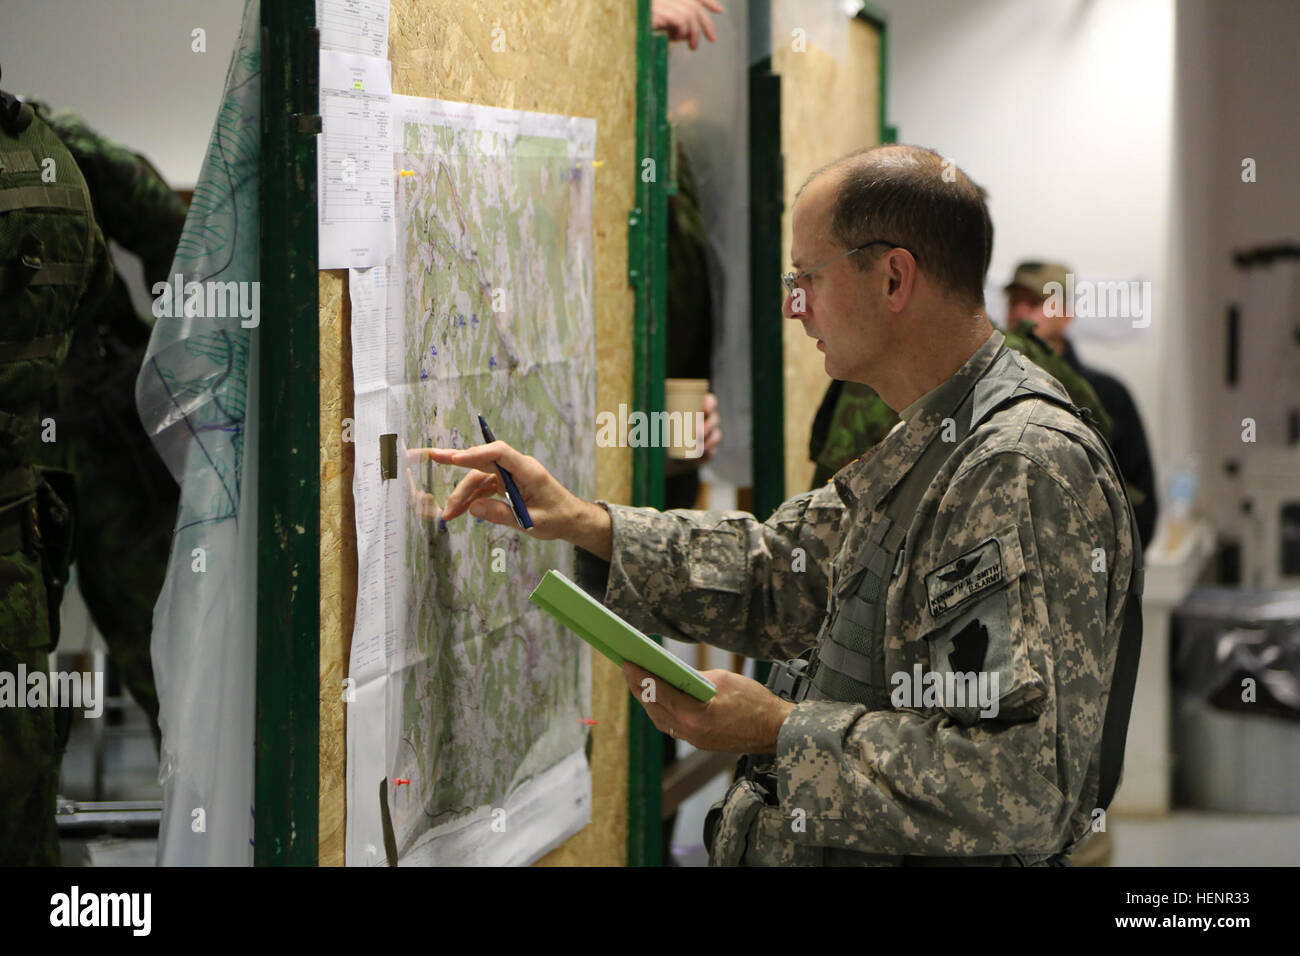 U.S. Army Maj. Kenneth Smith of Headquarters, Headquarters Company, 173rd Airborne Brigade, goes over a map overlay during training exercise Saber Junction 2014 at the Joint Multinational Readiness Center in Hohenfels, Germany, Aug. 31, 2014. Saber Junction 2014 prepares U.S., NATO allies and European security partners to conduct unified land operations through the simultaneous combination of offensive, defensive, and stability operations appropriate to the mission and the environment.  More information about Saber Junction 2014 can be found at http://www.eur.army.mil/SaberJunction/ (U.S. Army Stock Photo